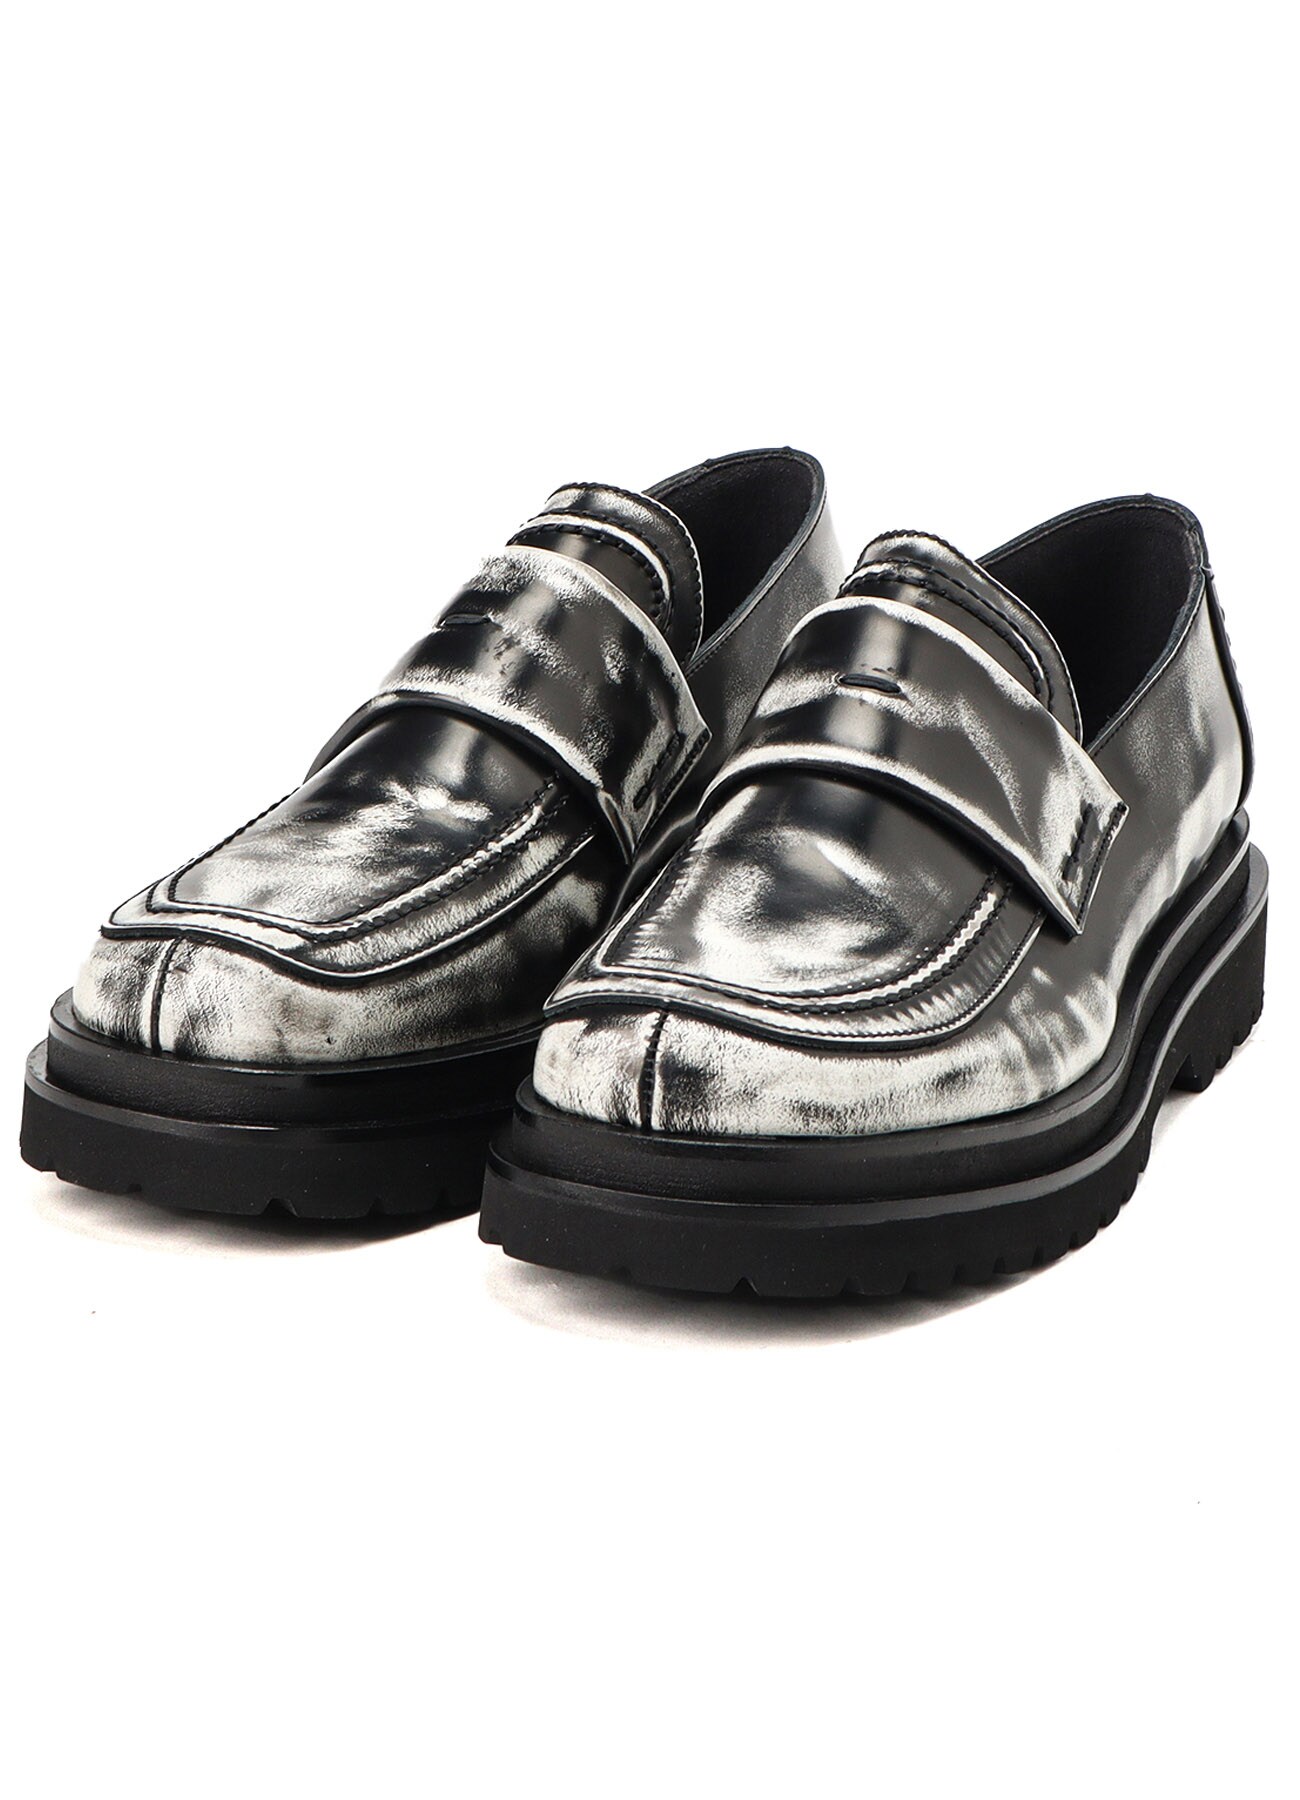 【7/26 12:00(JTS) Release】ADVANTIQUE LEATHER DOUBLE SOLE TUCK LOAFERS